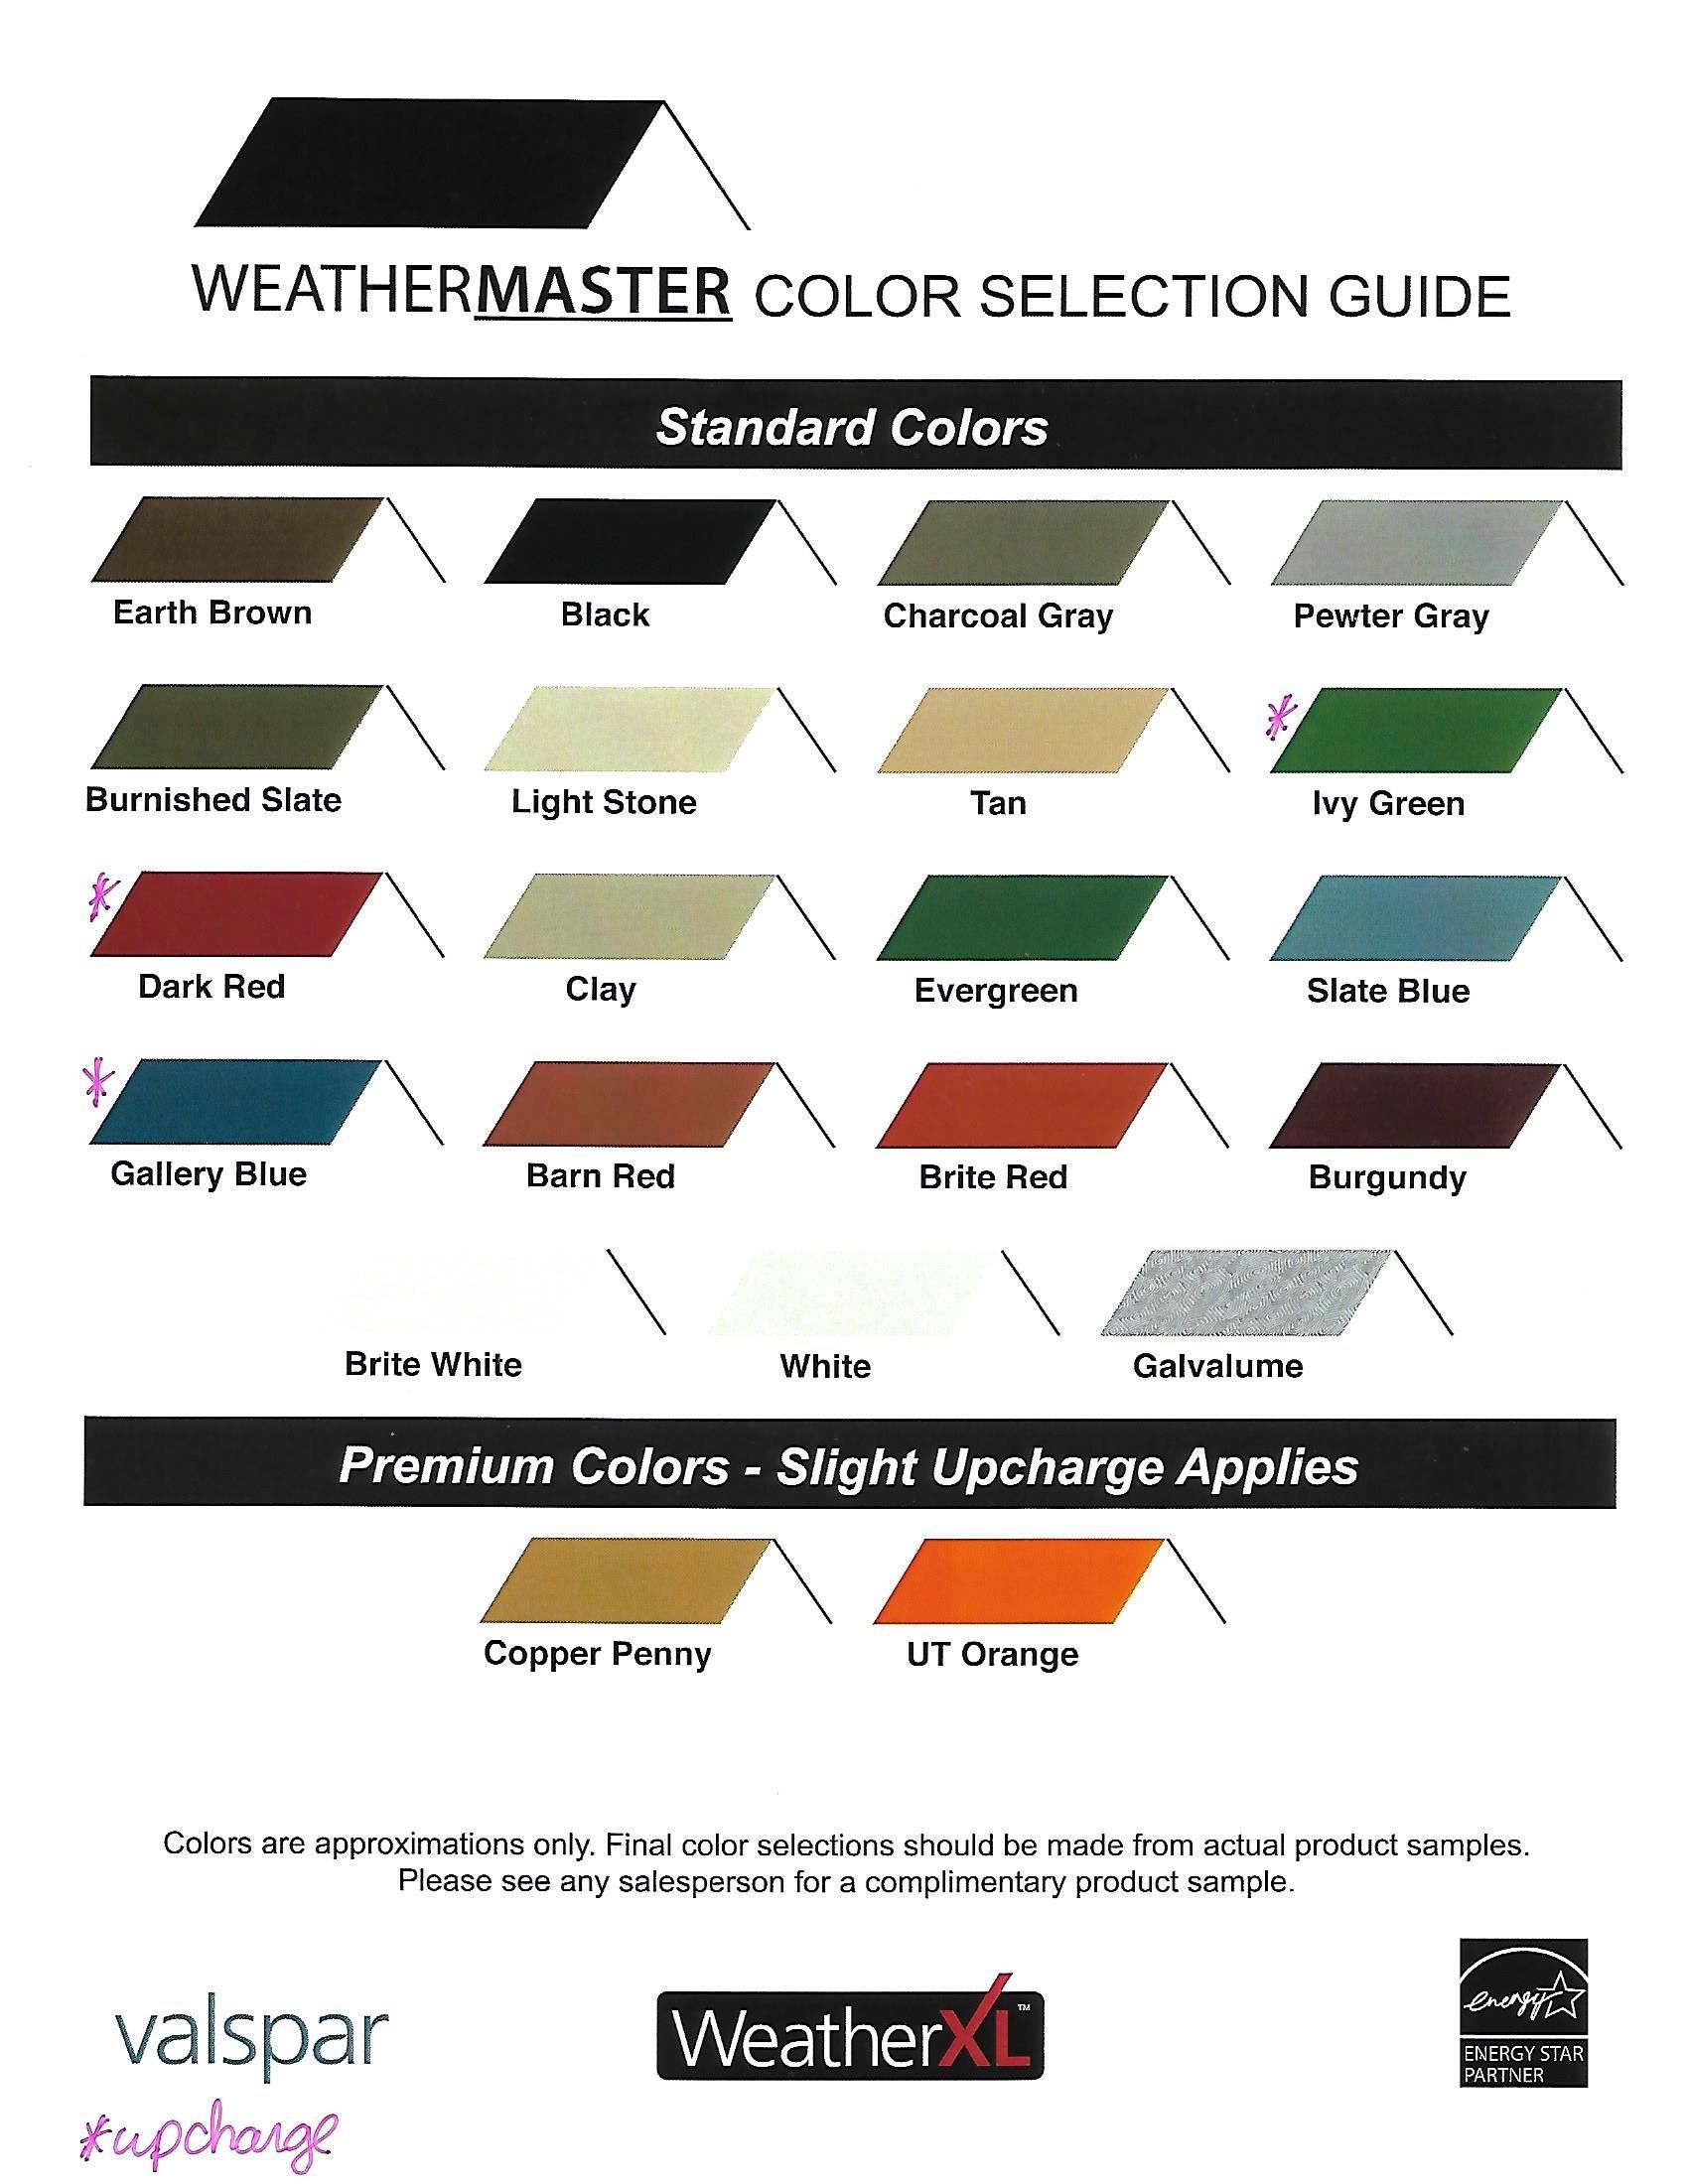 WeatherMaster color selection guide